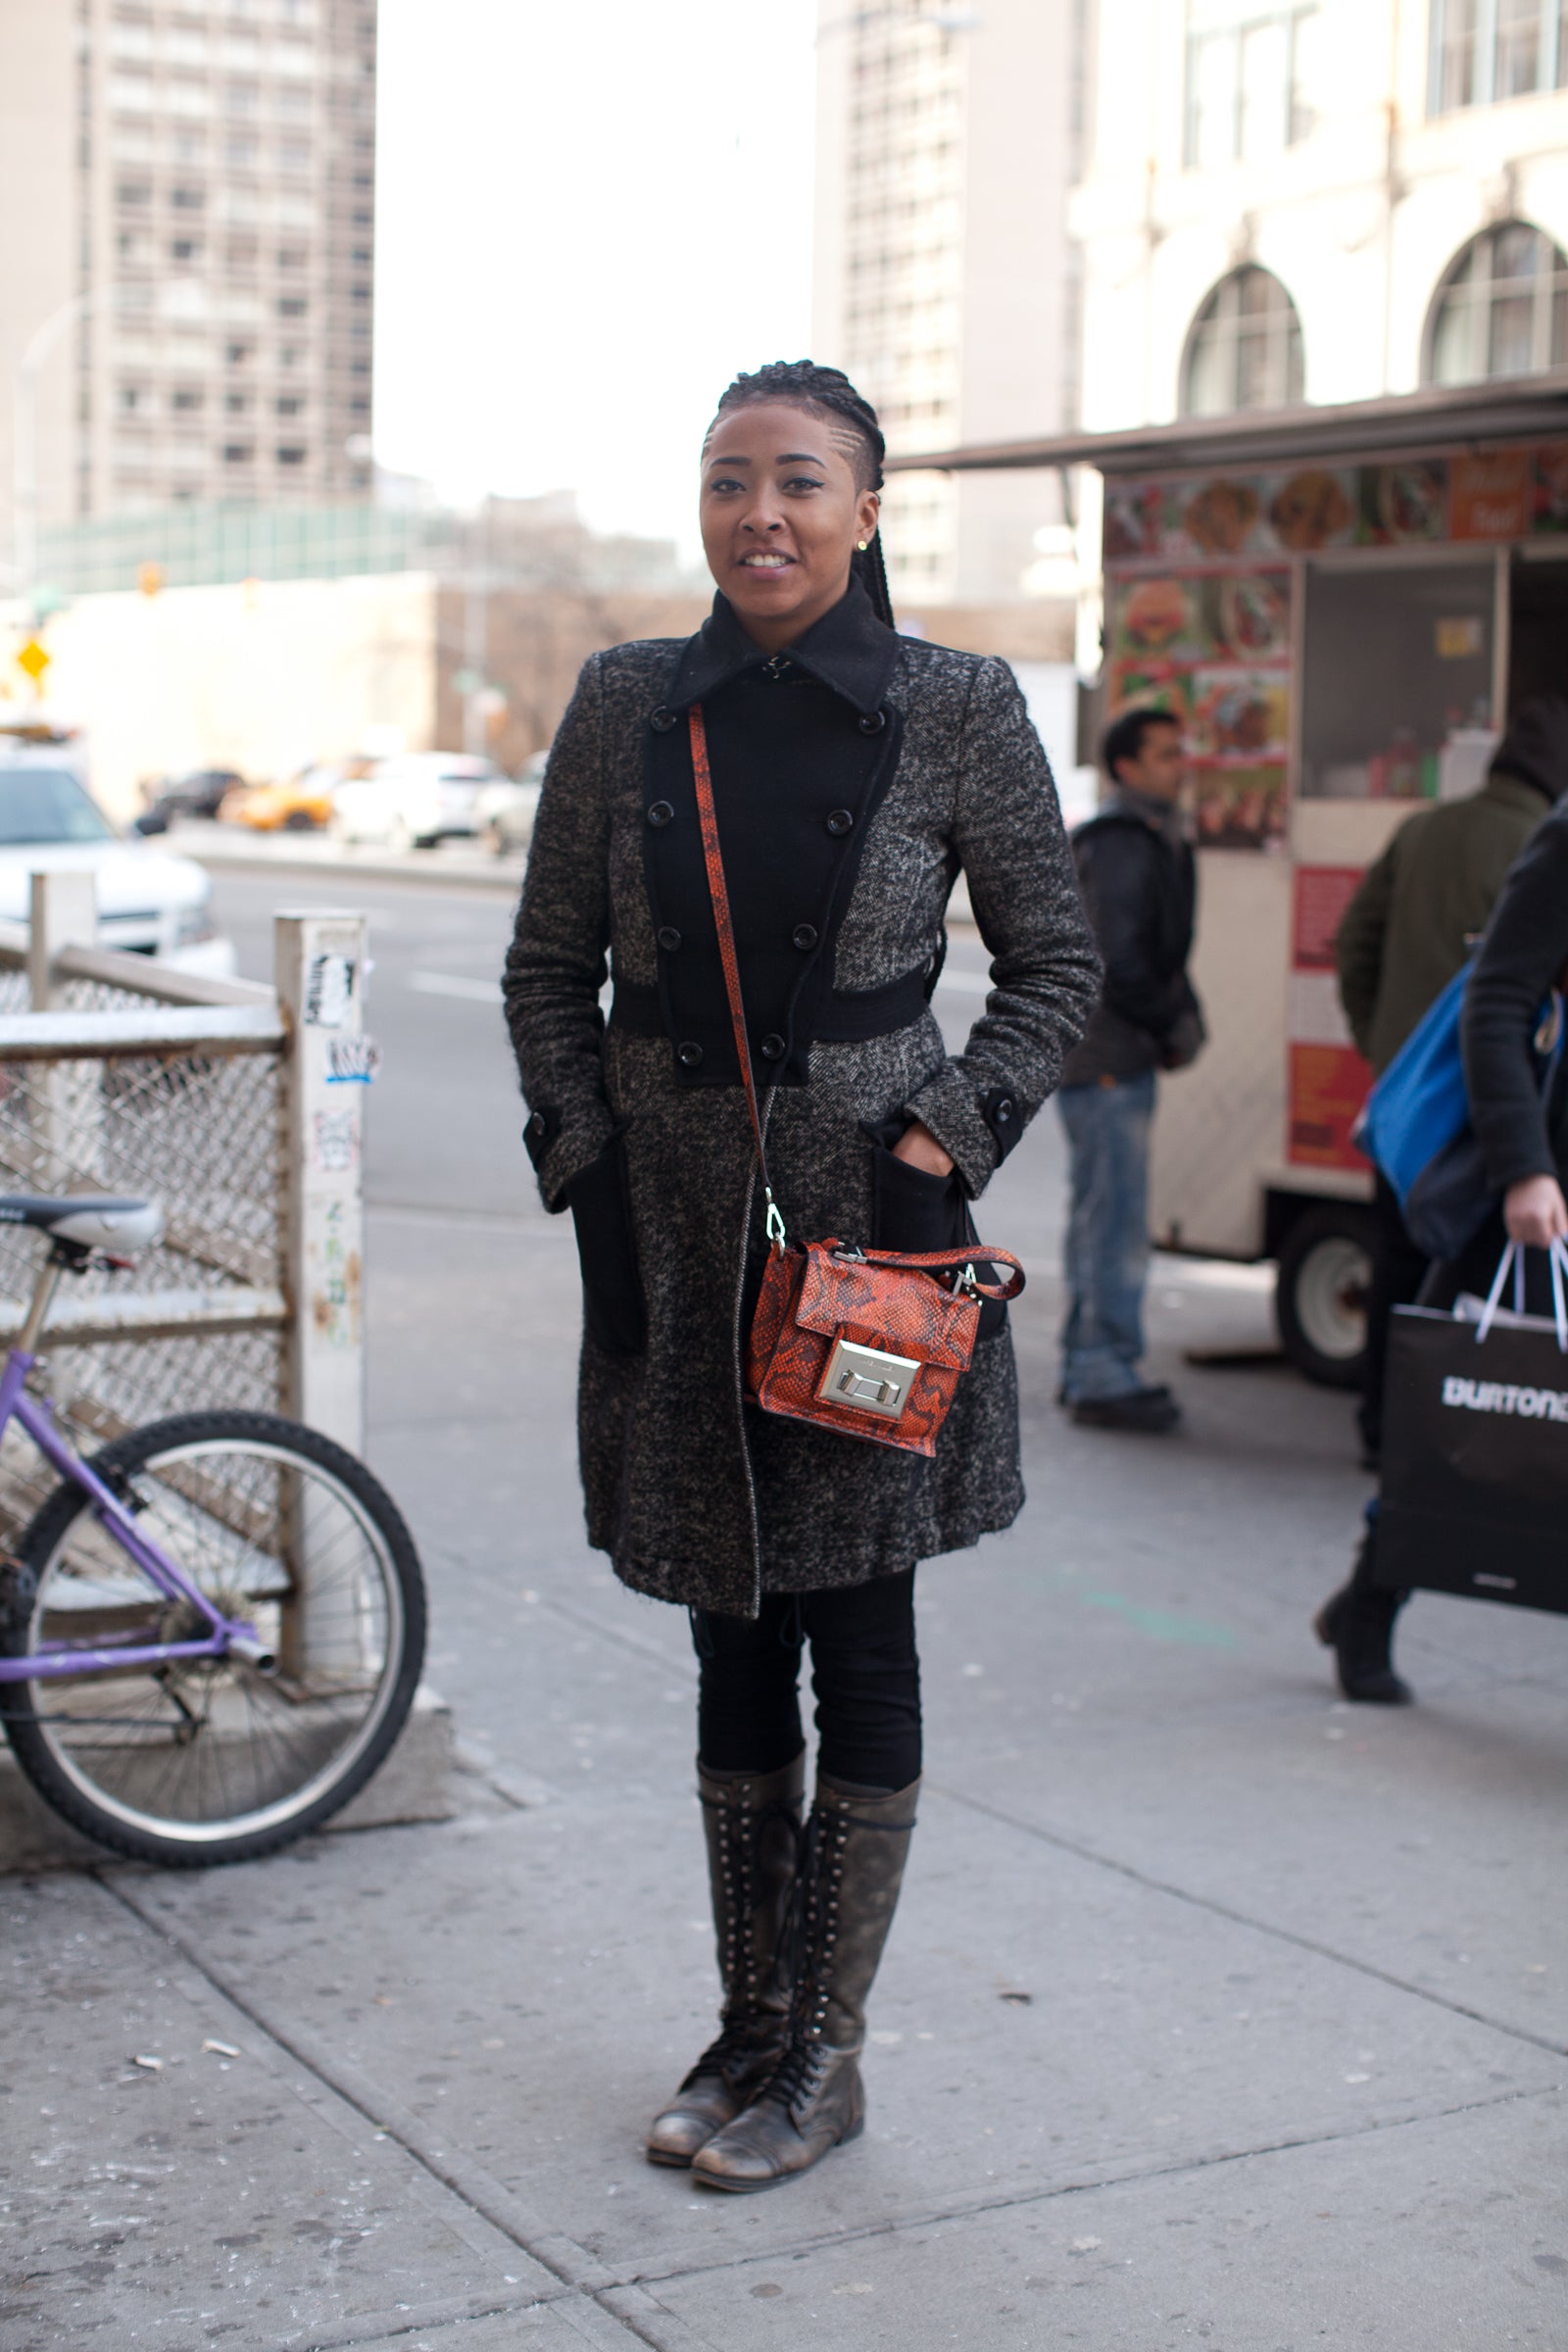 Street Style: Sisters in The City